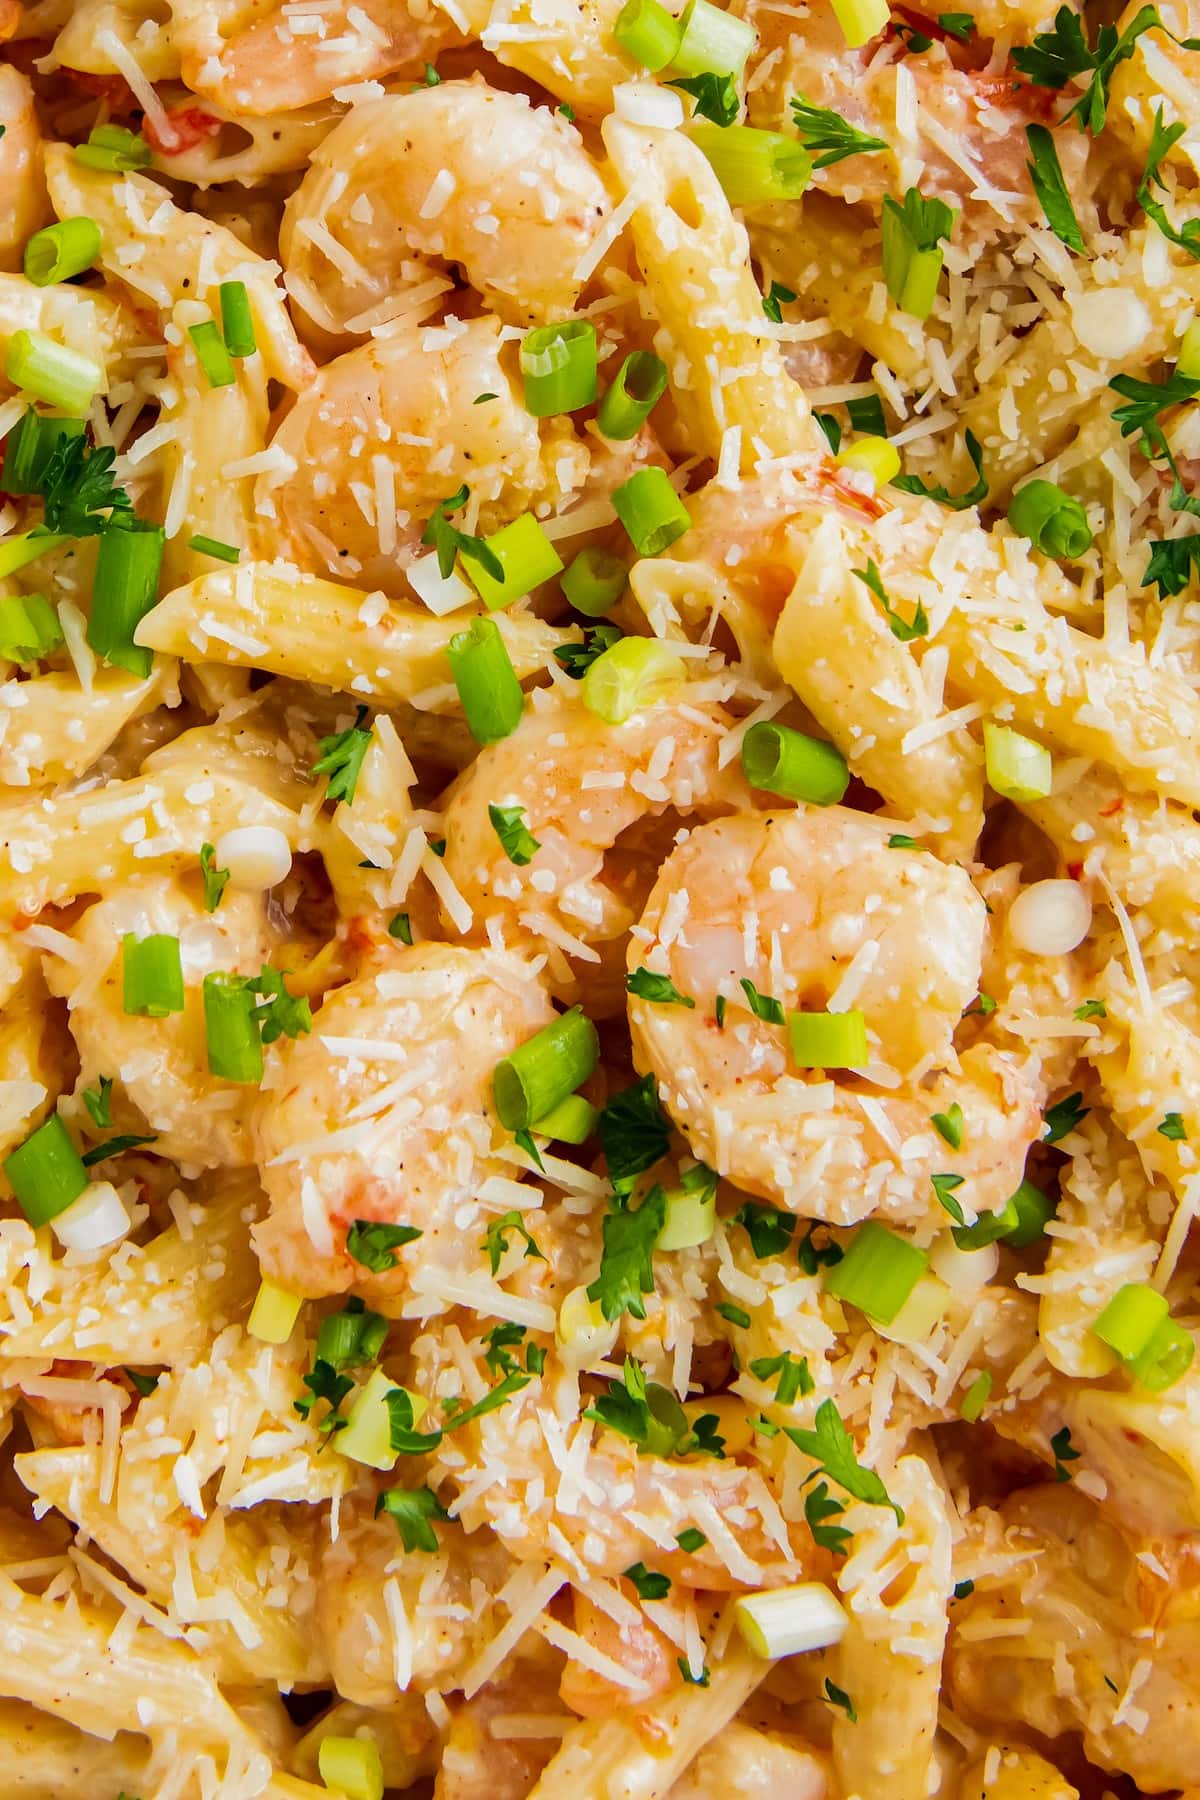 Cajun shrimp pasta with green onions and Parmesan on top.